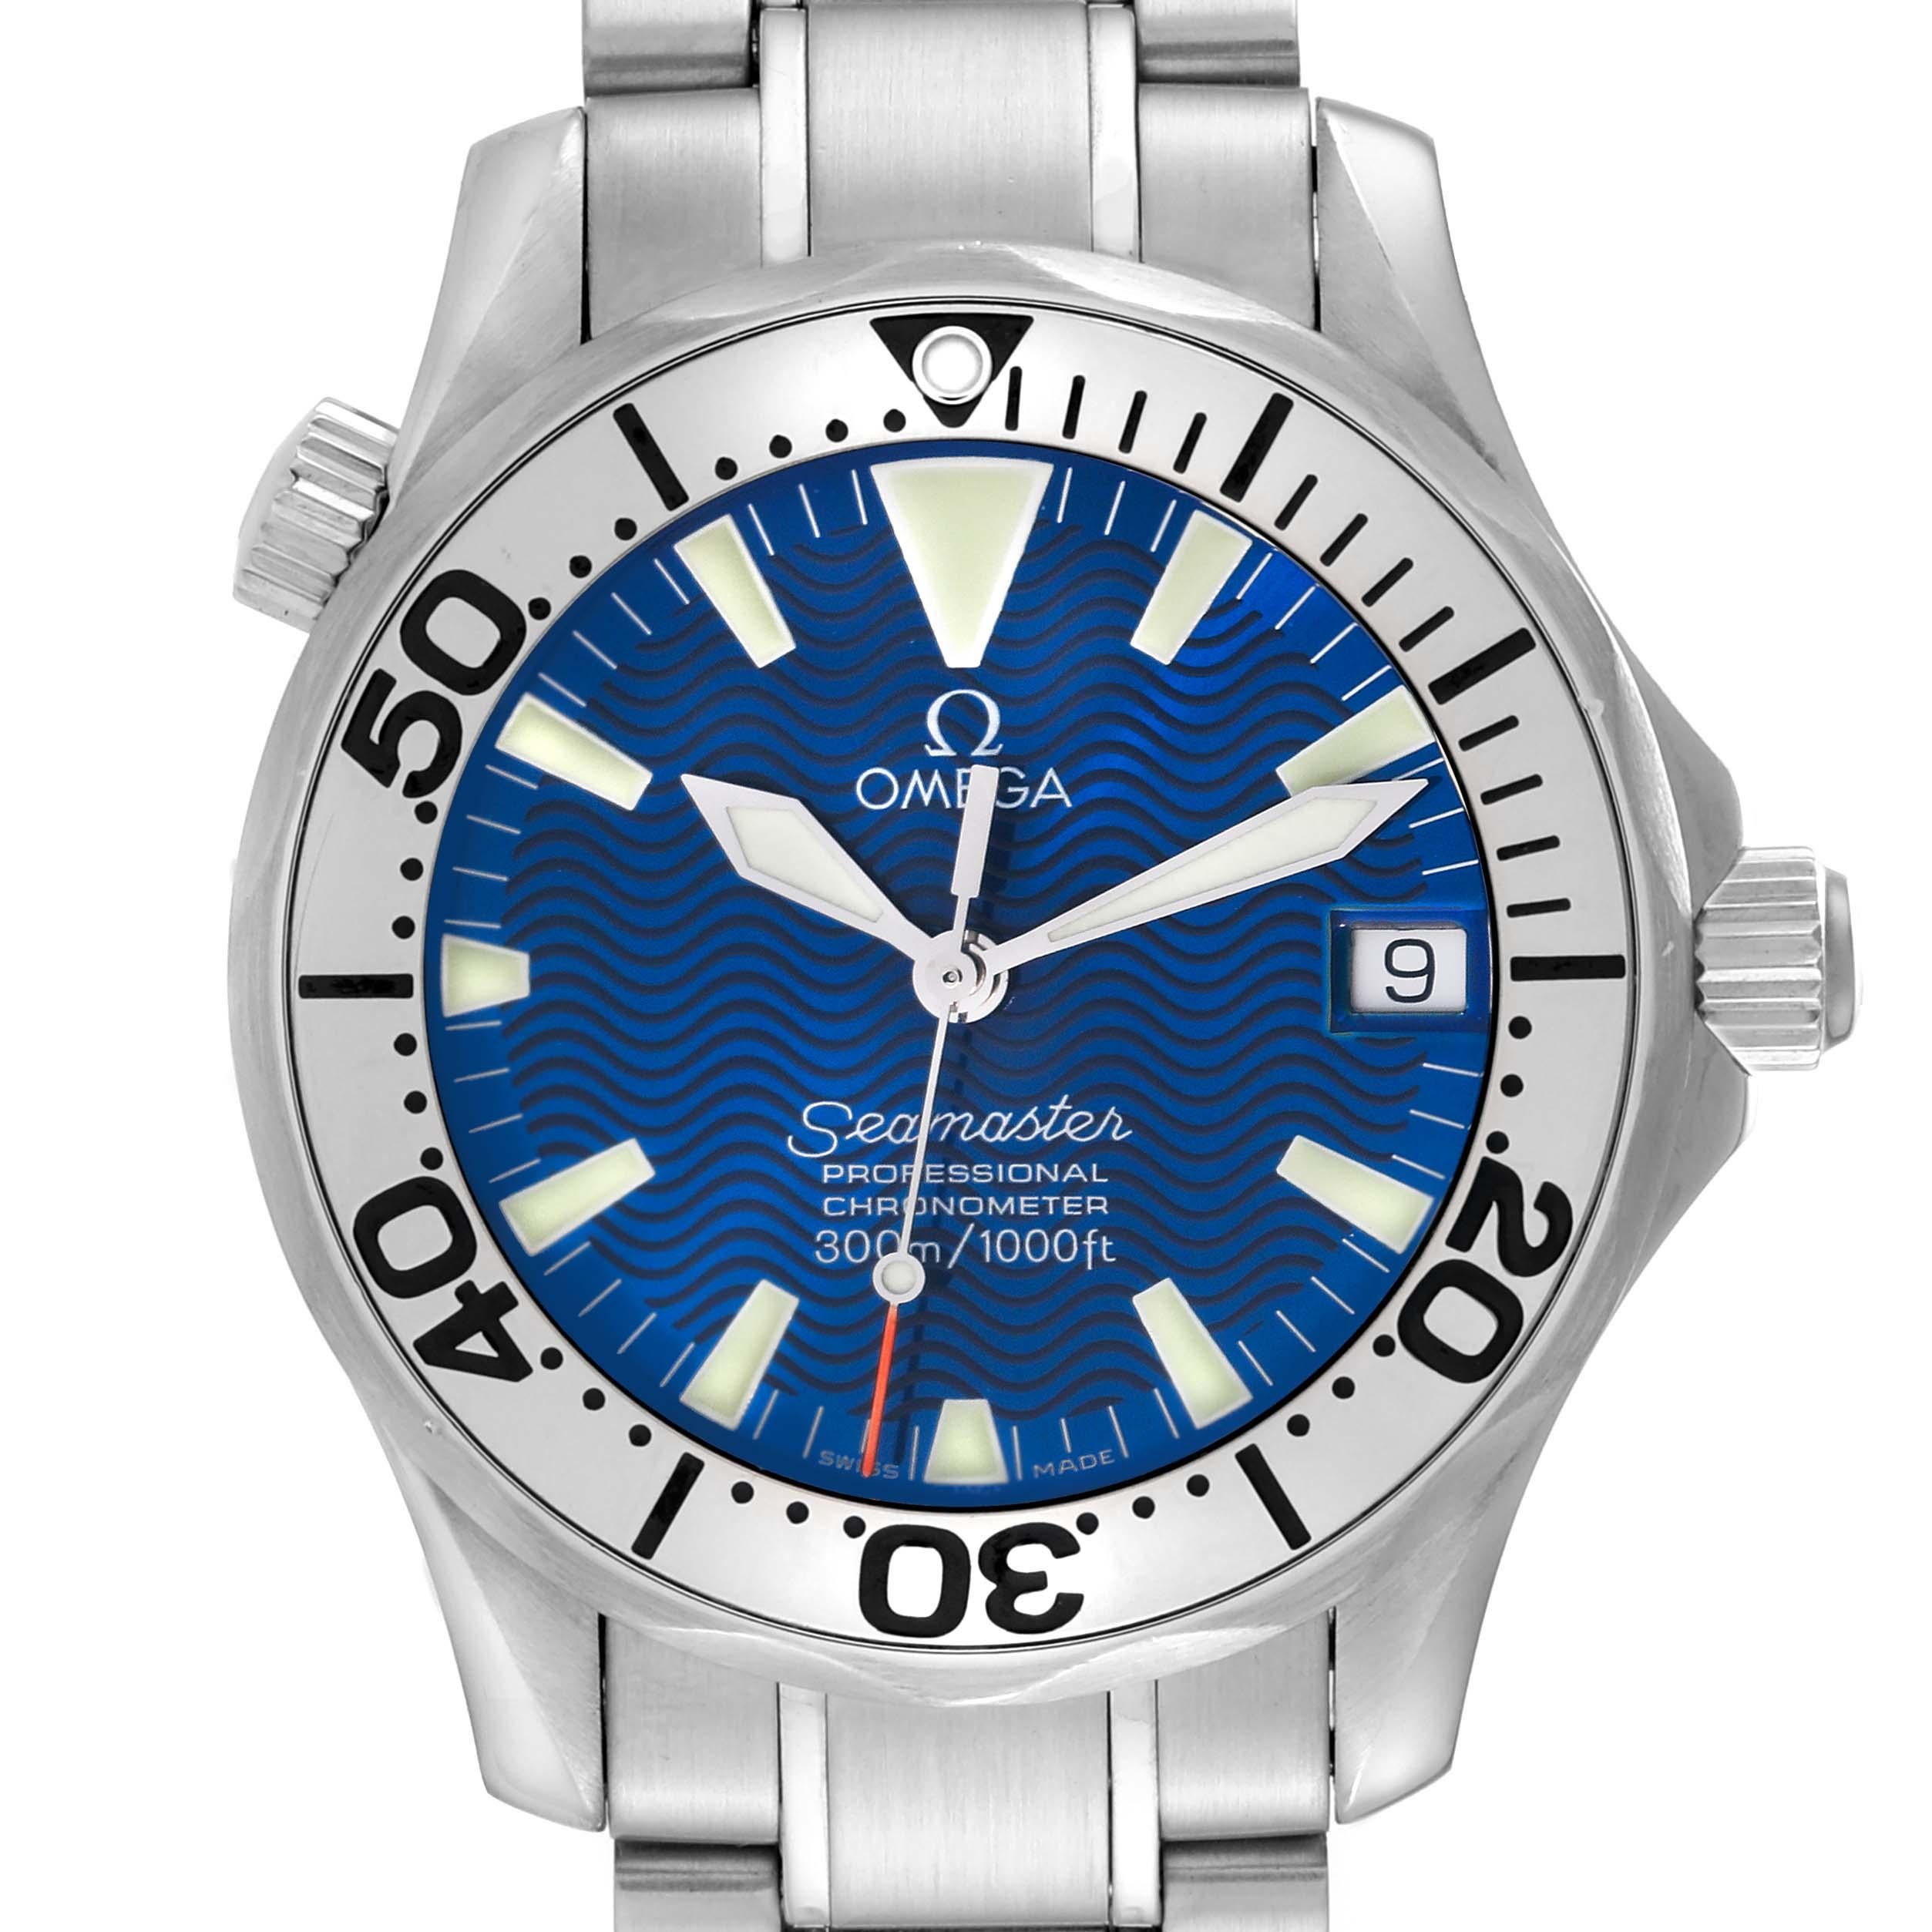 Omega Seamaster 300M Blue Dial Steel Mens Watch 2253.80.00. Officially certified chronometer automatic self-winding movement. Caliber 1120. Stainless steel case 36.25 mm in diameter. Omega logo on a crown. Stainless steel unidirectional rotating